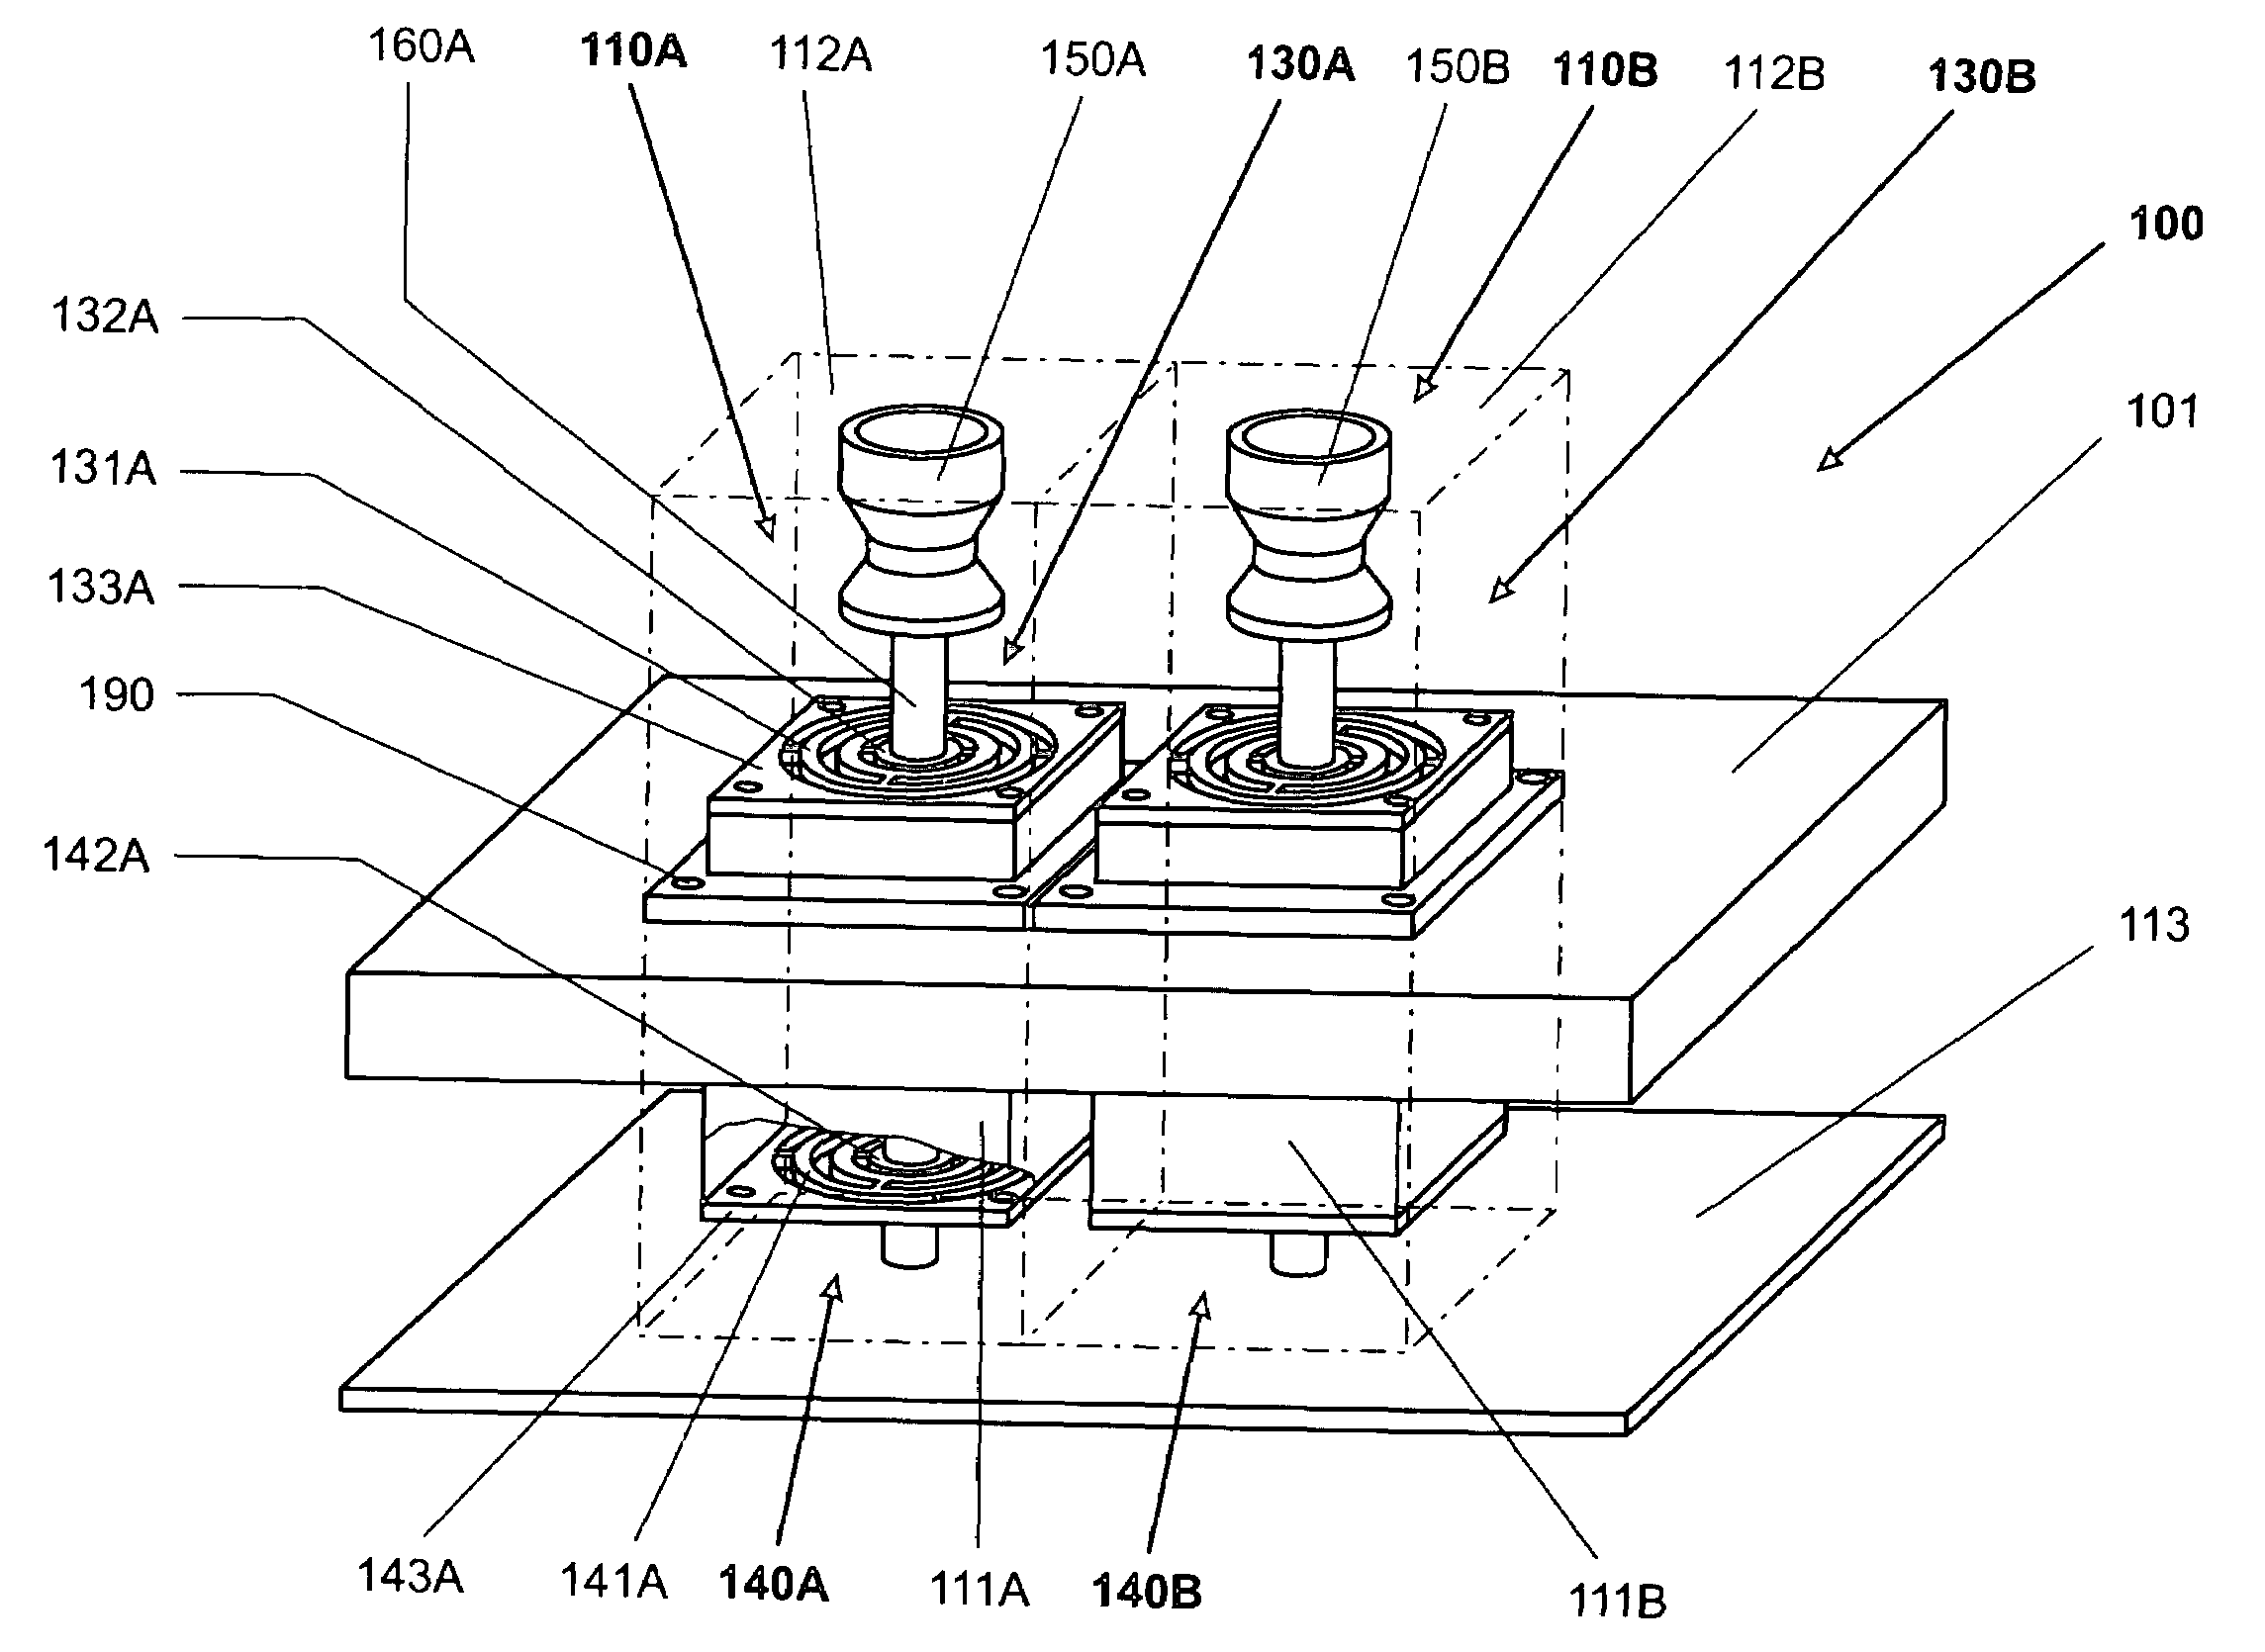 Parallel-guiding mechanism for compact weighing system